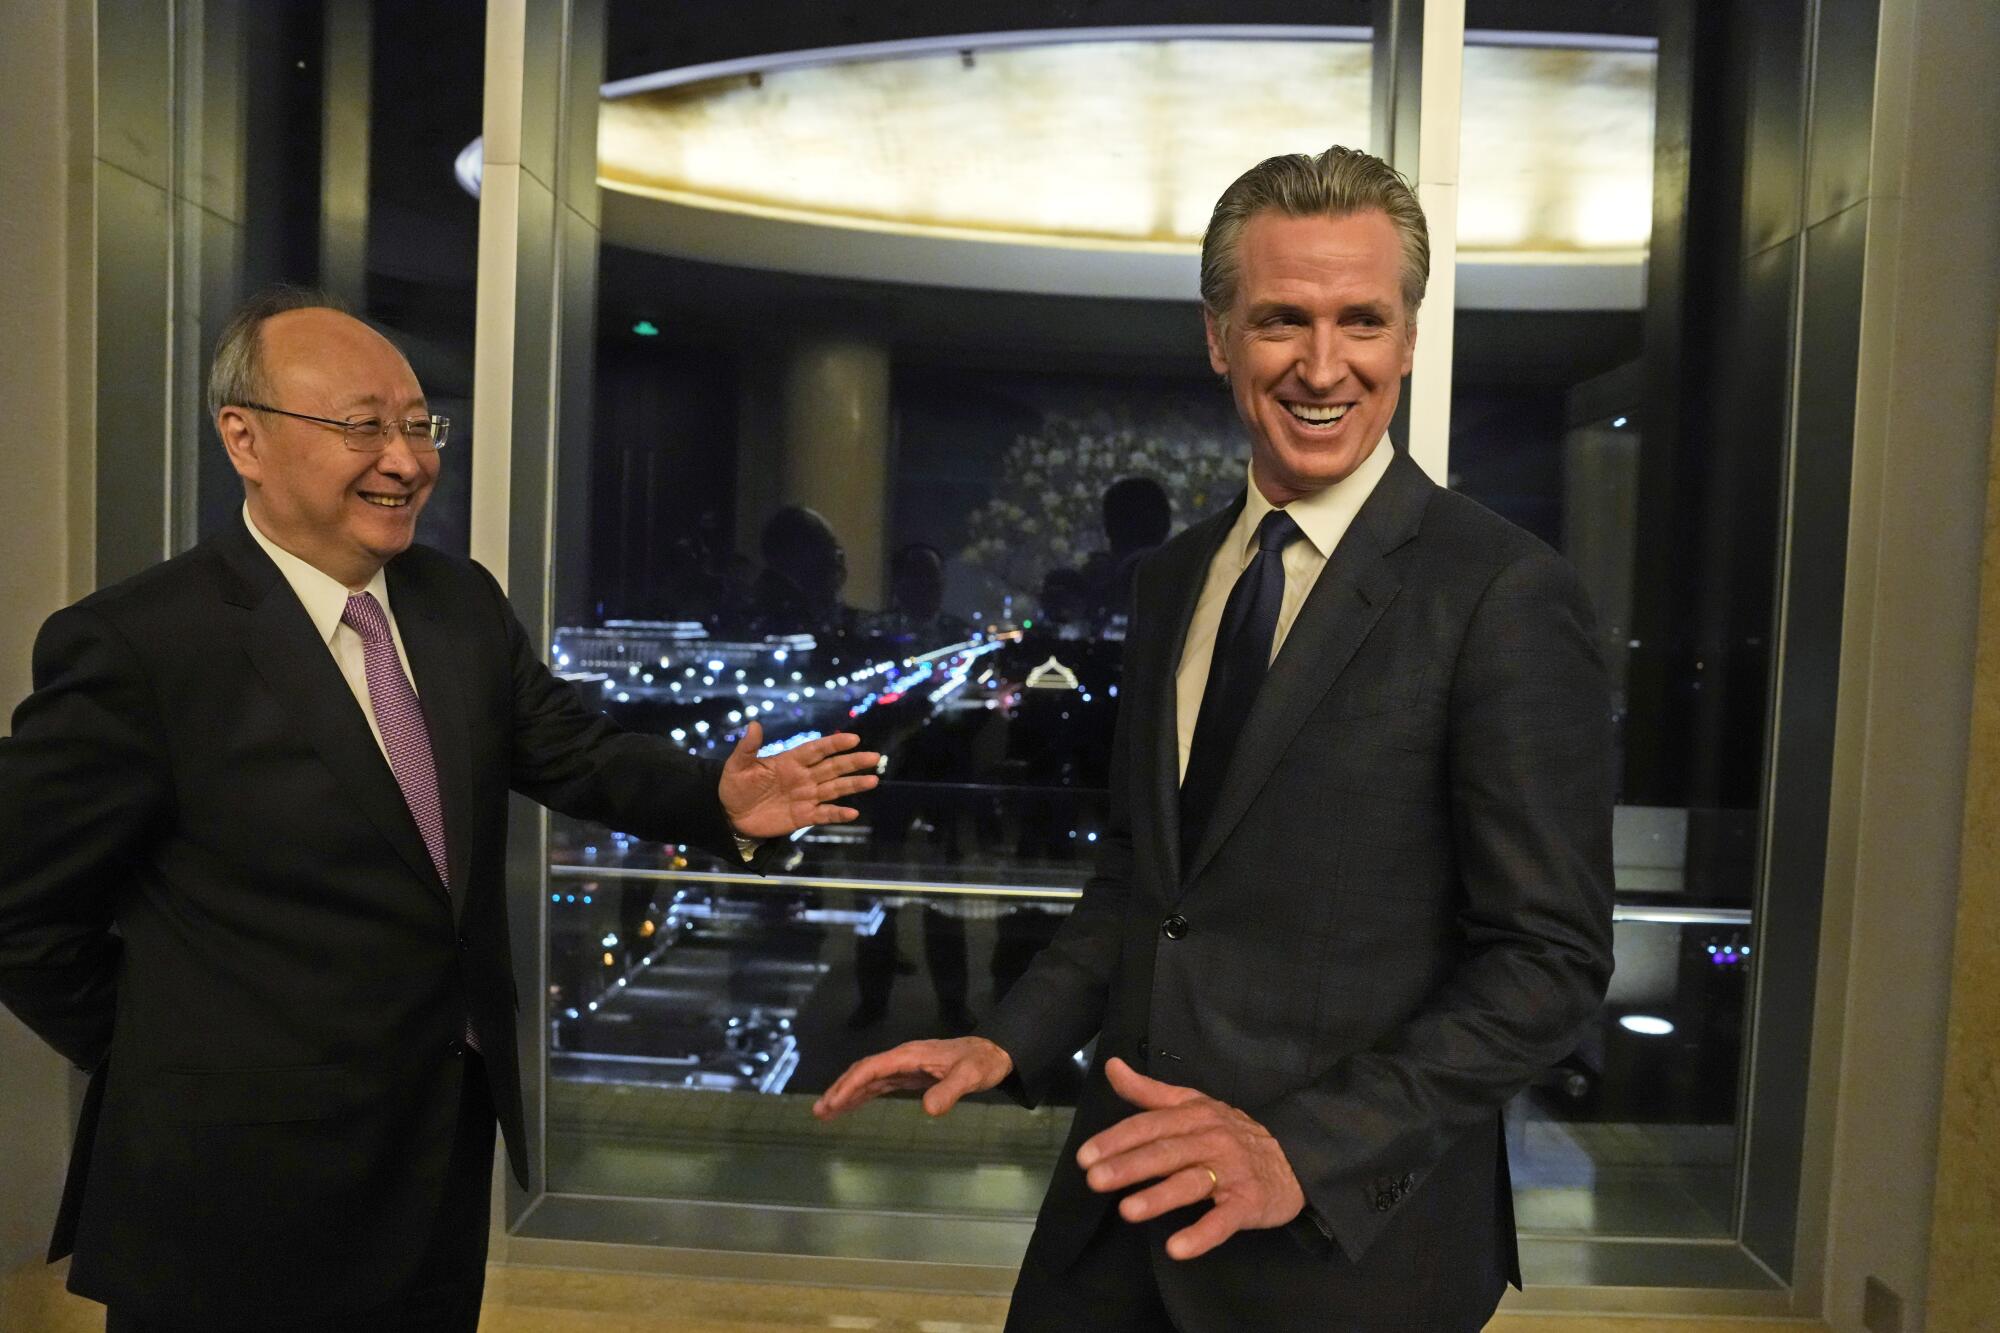 Gov. Gavin Newsom with a Chinese official in a building lobby